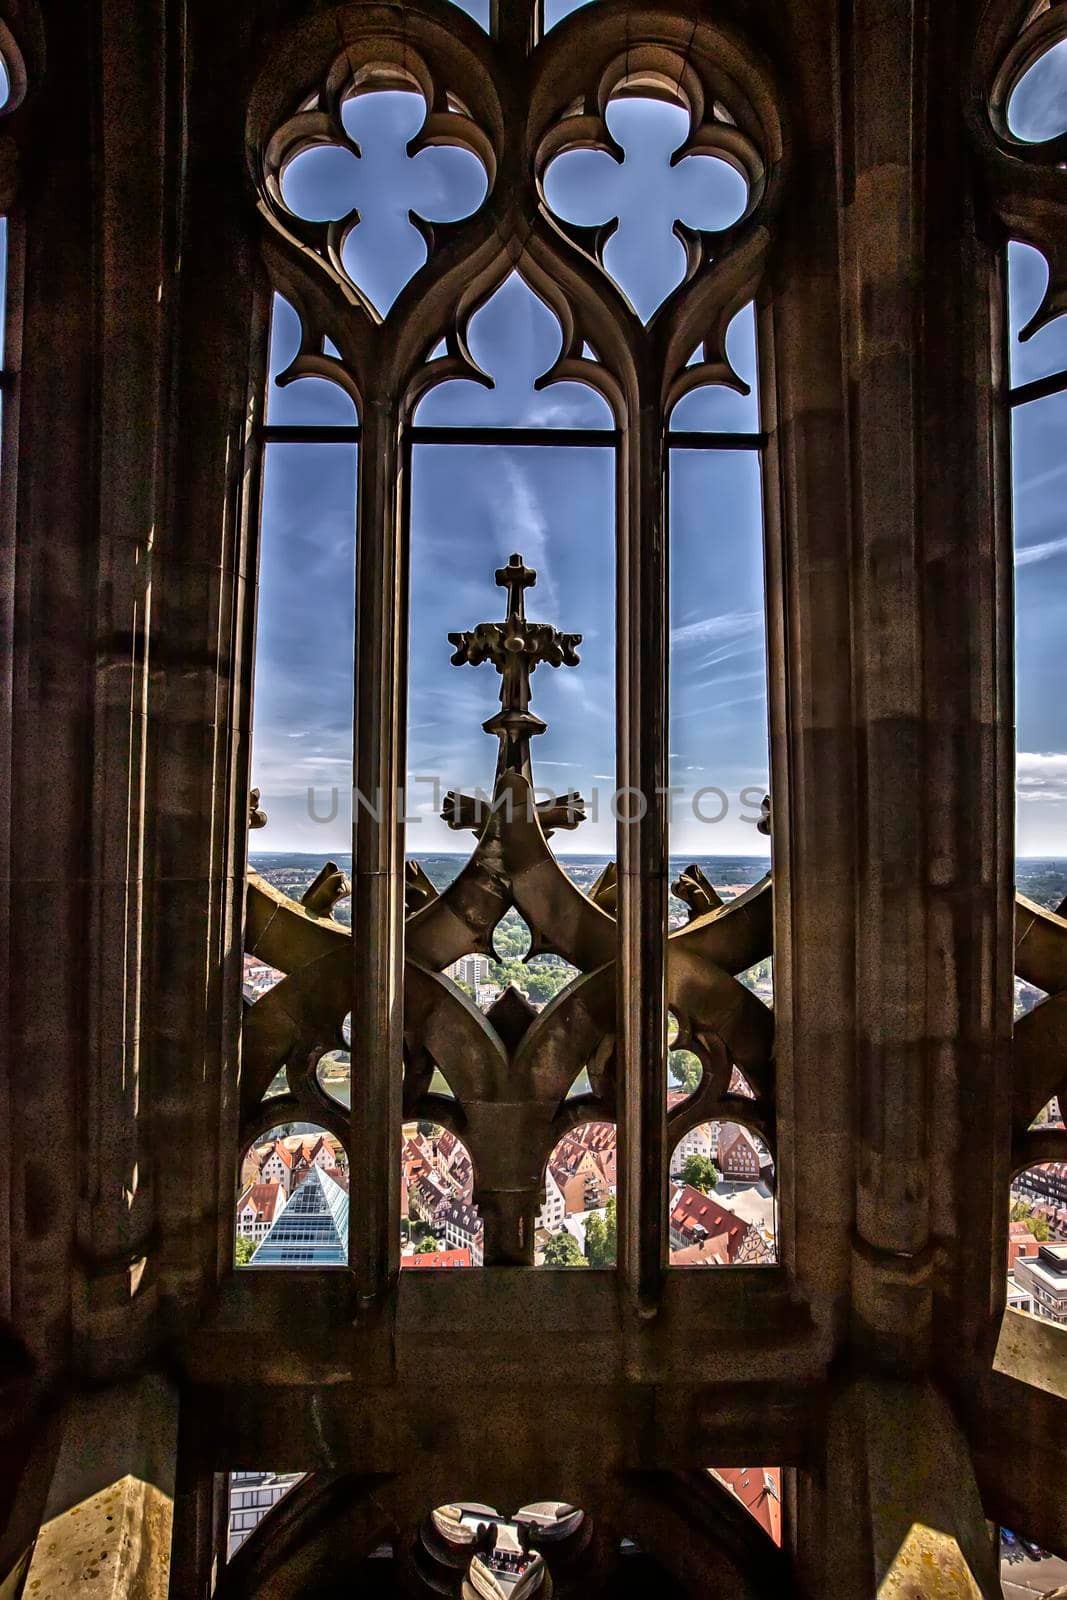 Architecture detail, the tower window of the church in Ulm, Germany